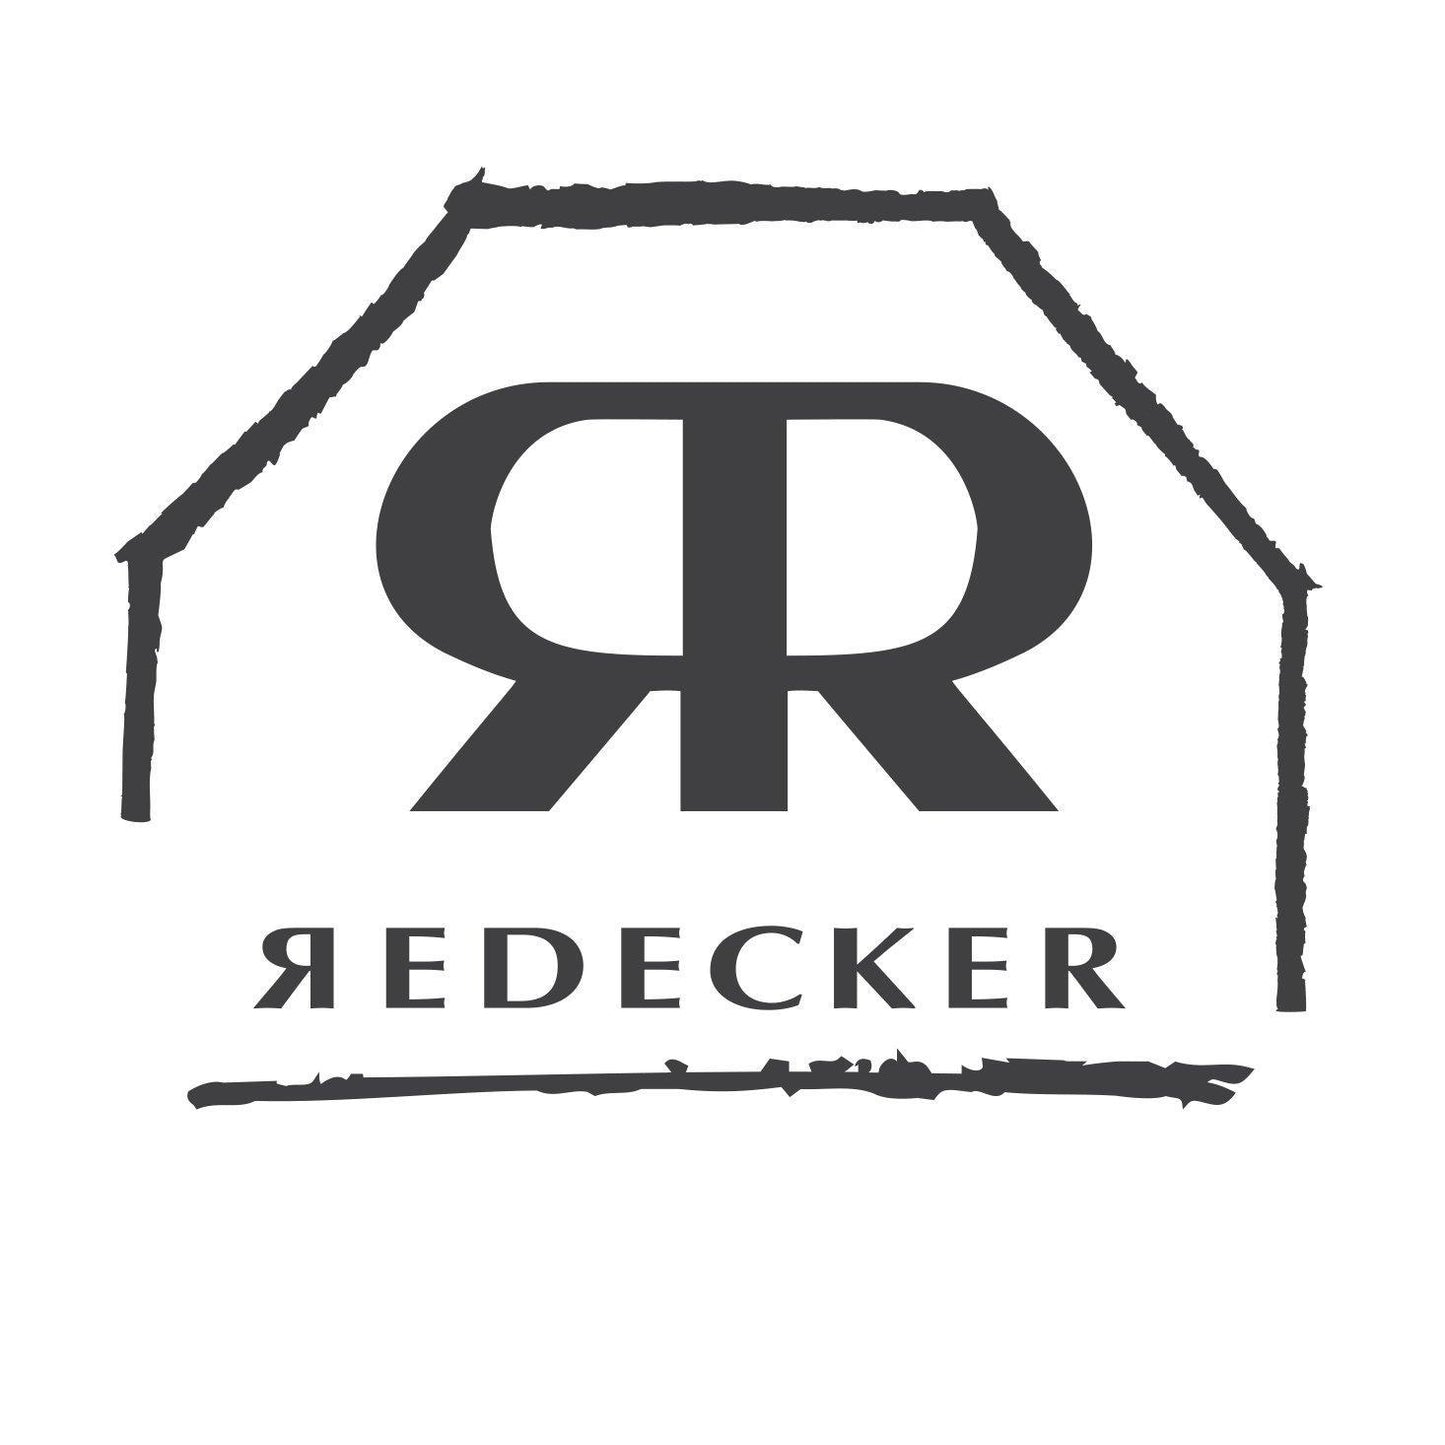 Felix Scrub Brush Redecker - Here and There Makers